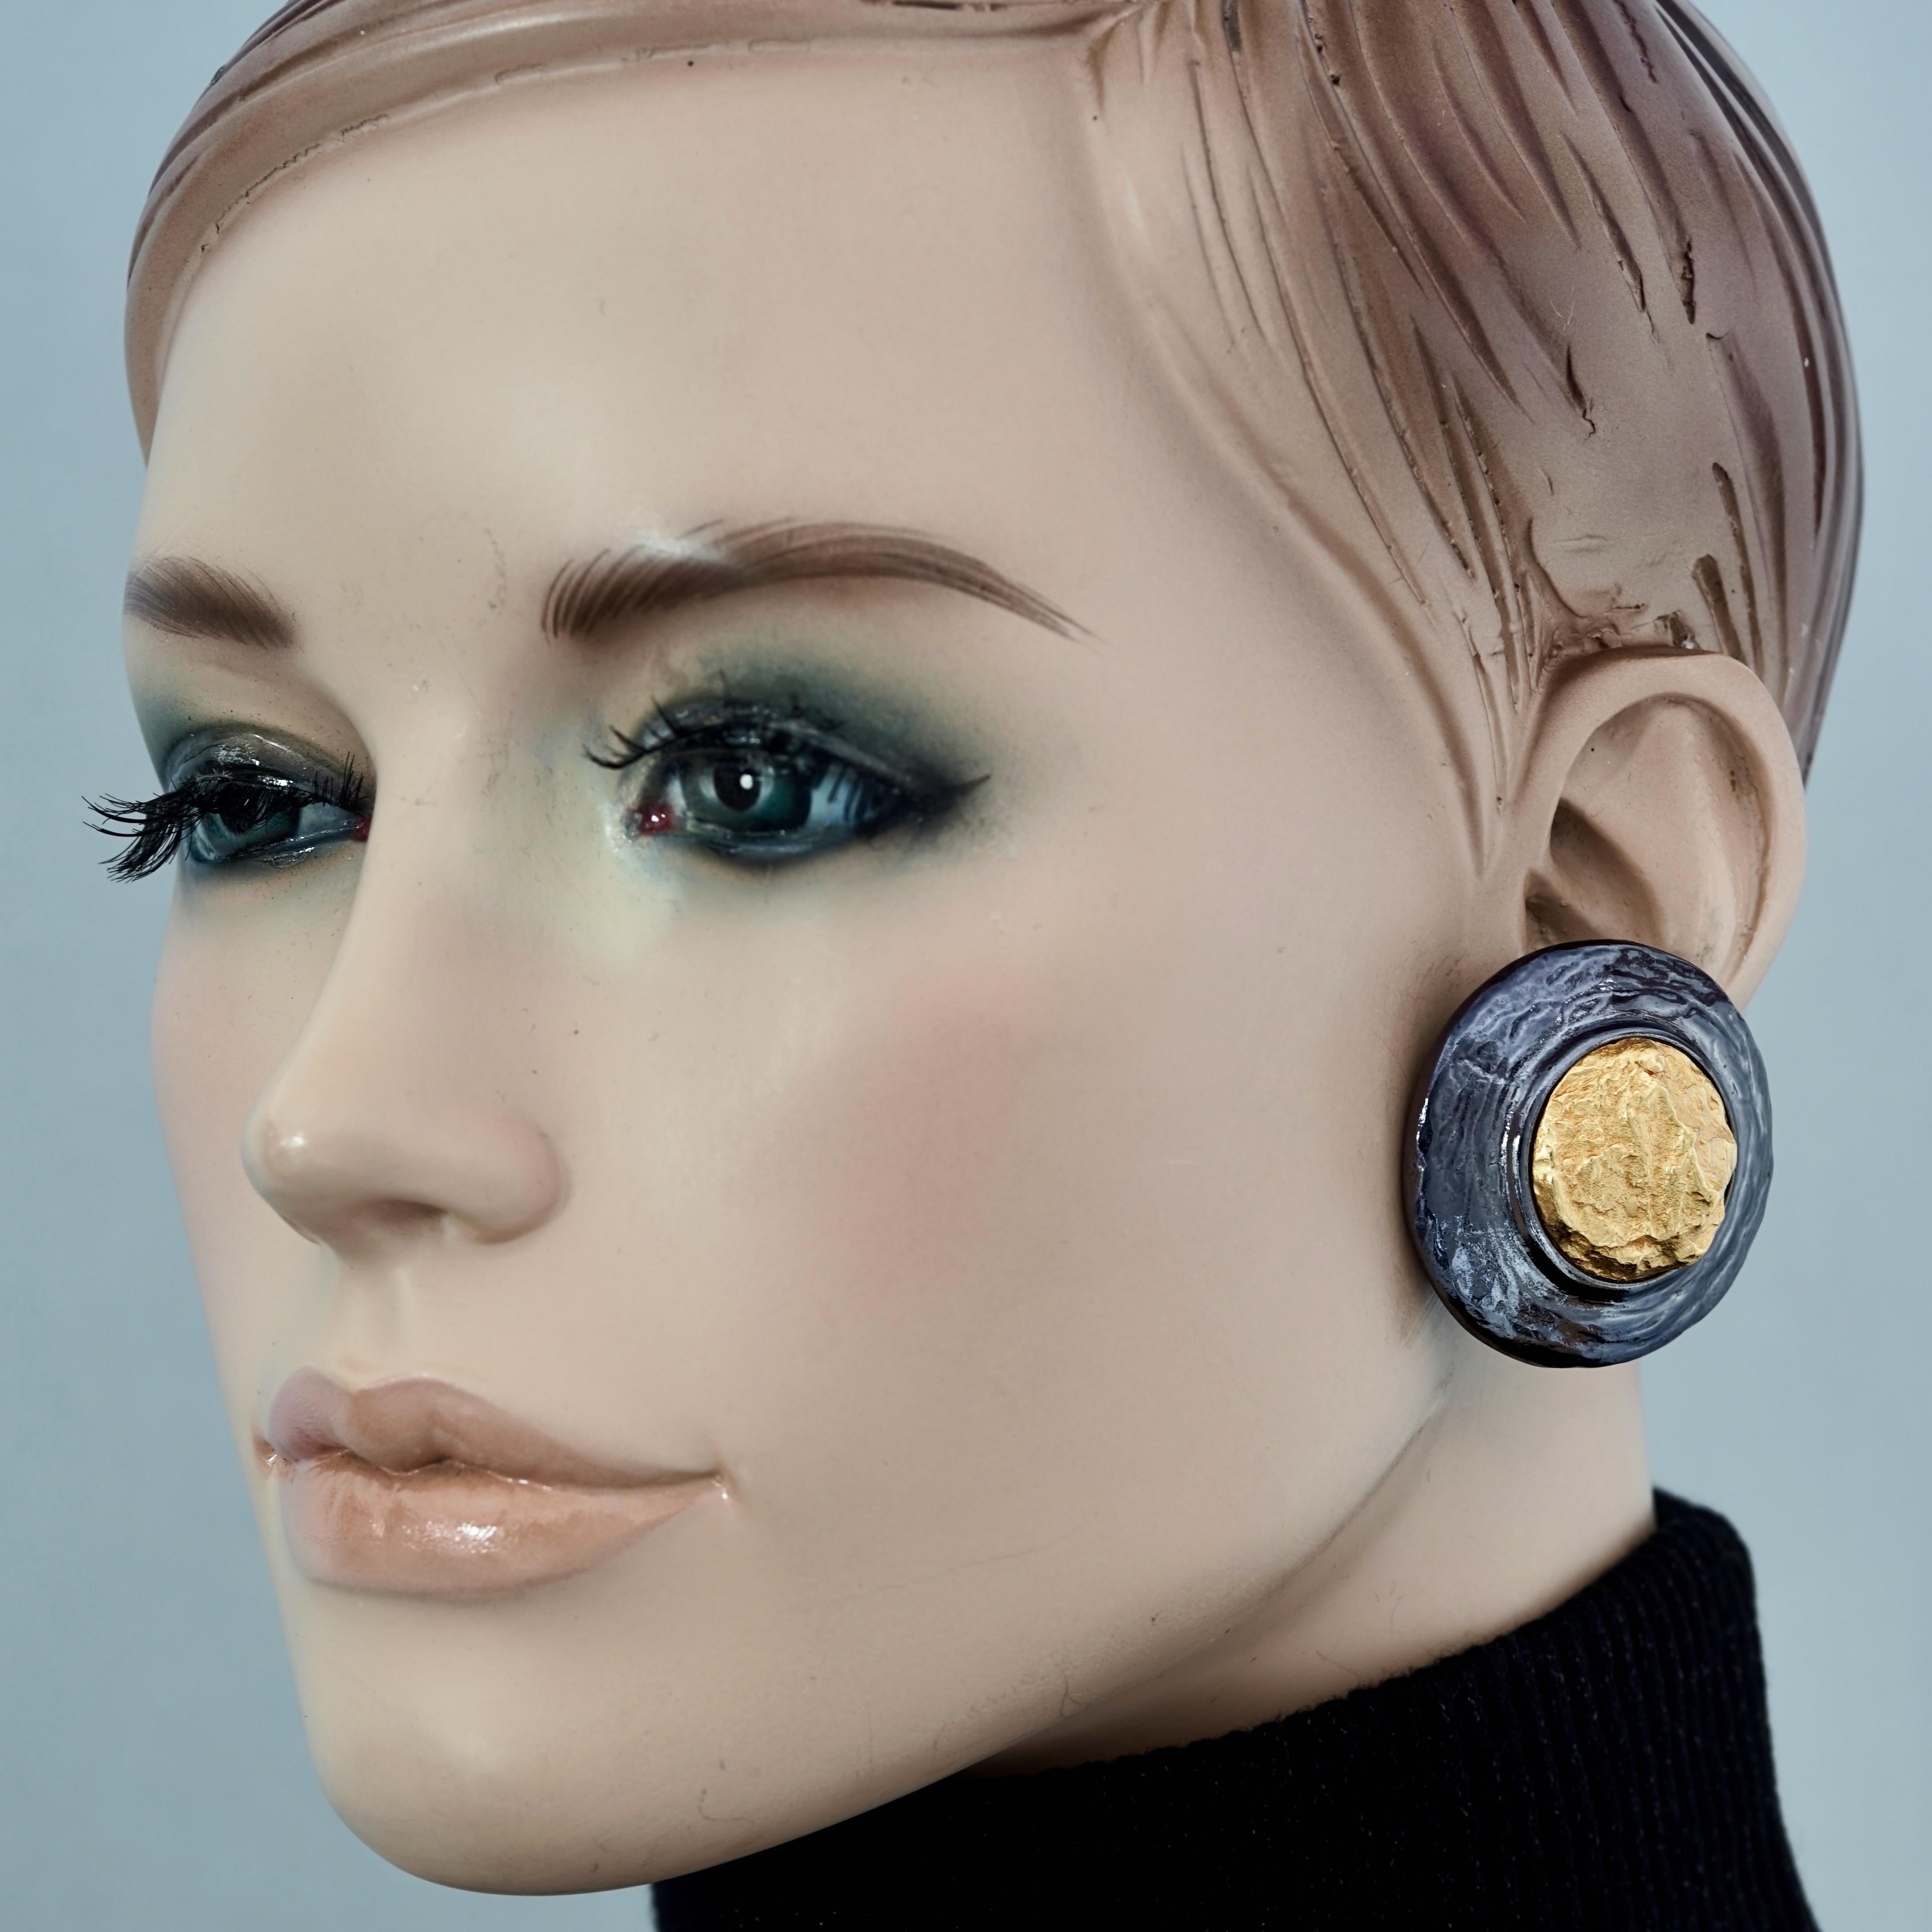 Vintage YVES SAINT LAURENT Ysl Black Enamel Textured Gold Nugget Disc Earrings

Measurements:
Height: 1.57 inches (4 cm)
Width: 1.57 inches (4 cm)
Weight per Earring: 30 grams

Features:
- 100% Authentic YVES SAINT LAURENT.
- Disc earrings in black